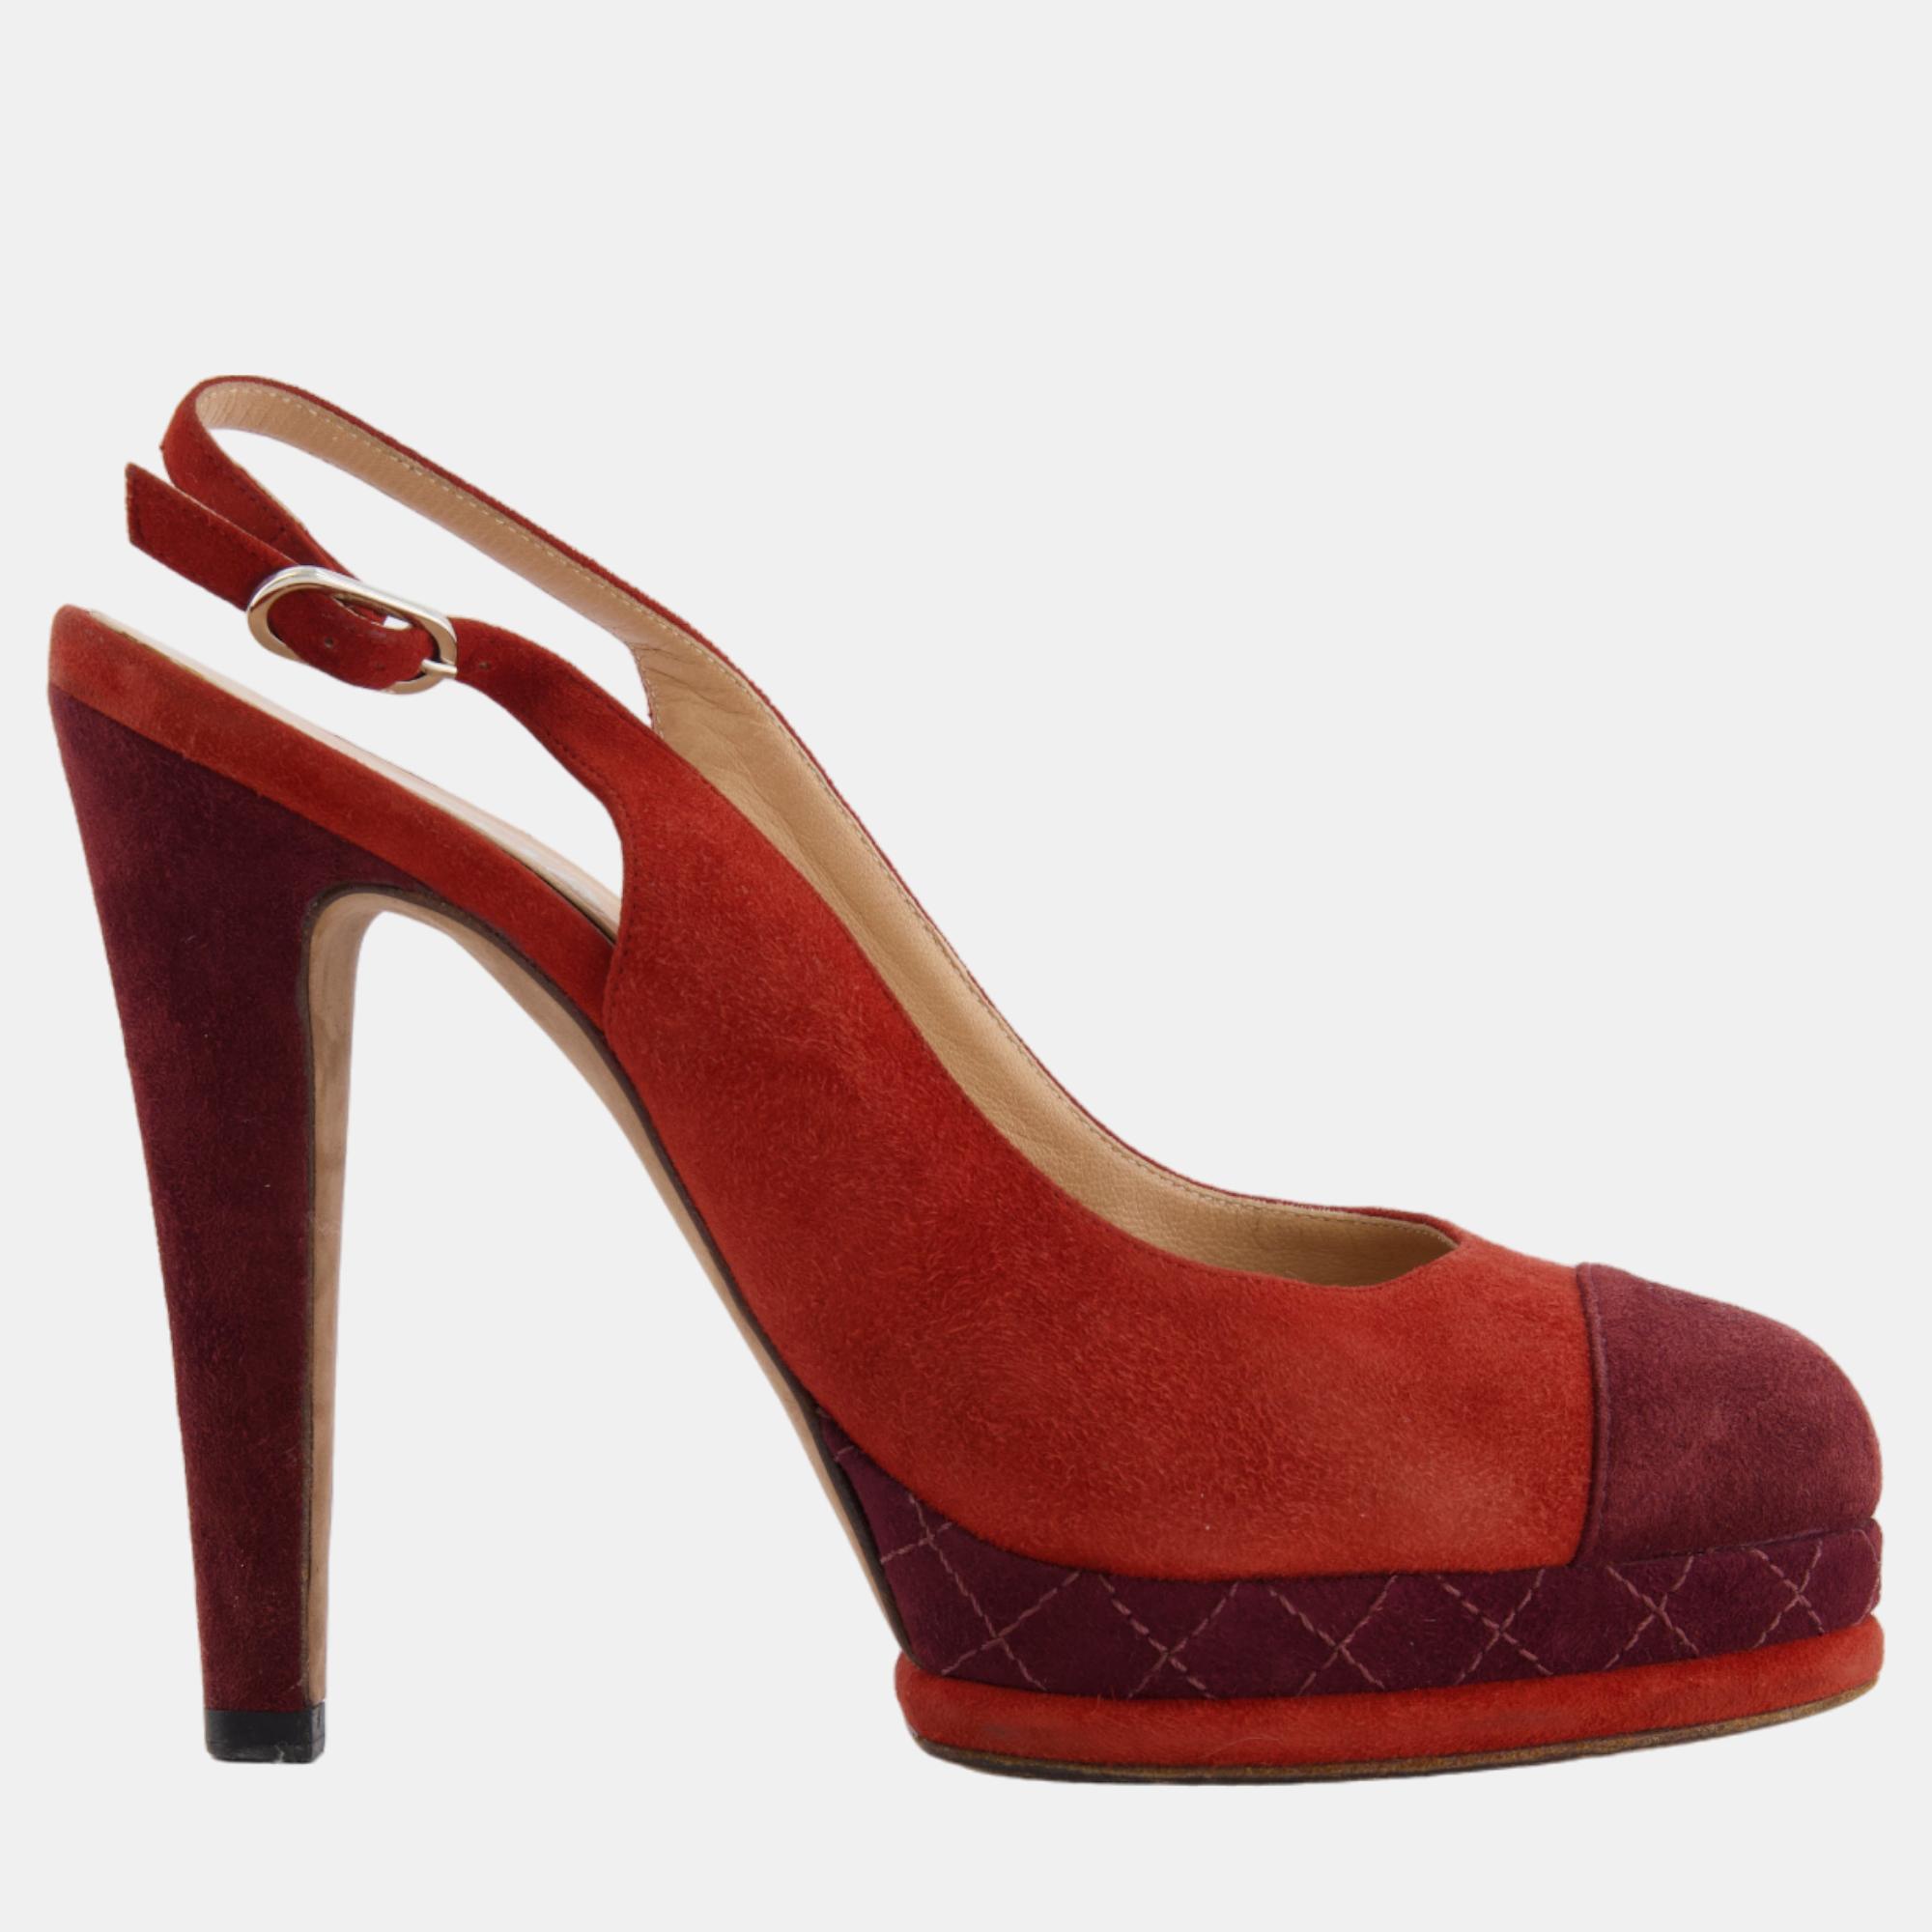 Chanel burnt orange and burgundy suede pumps with cc logo detail size eu 39